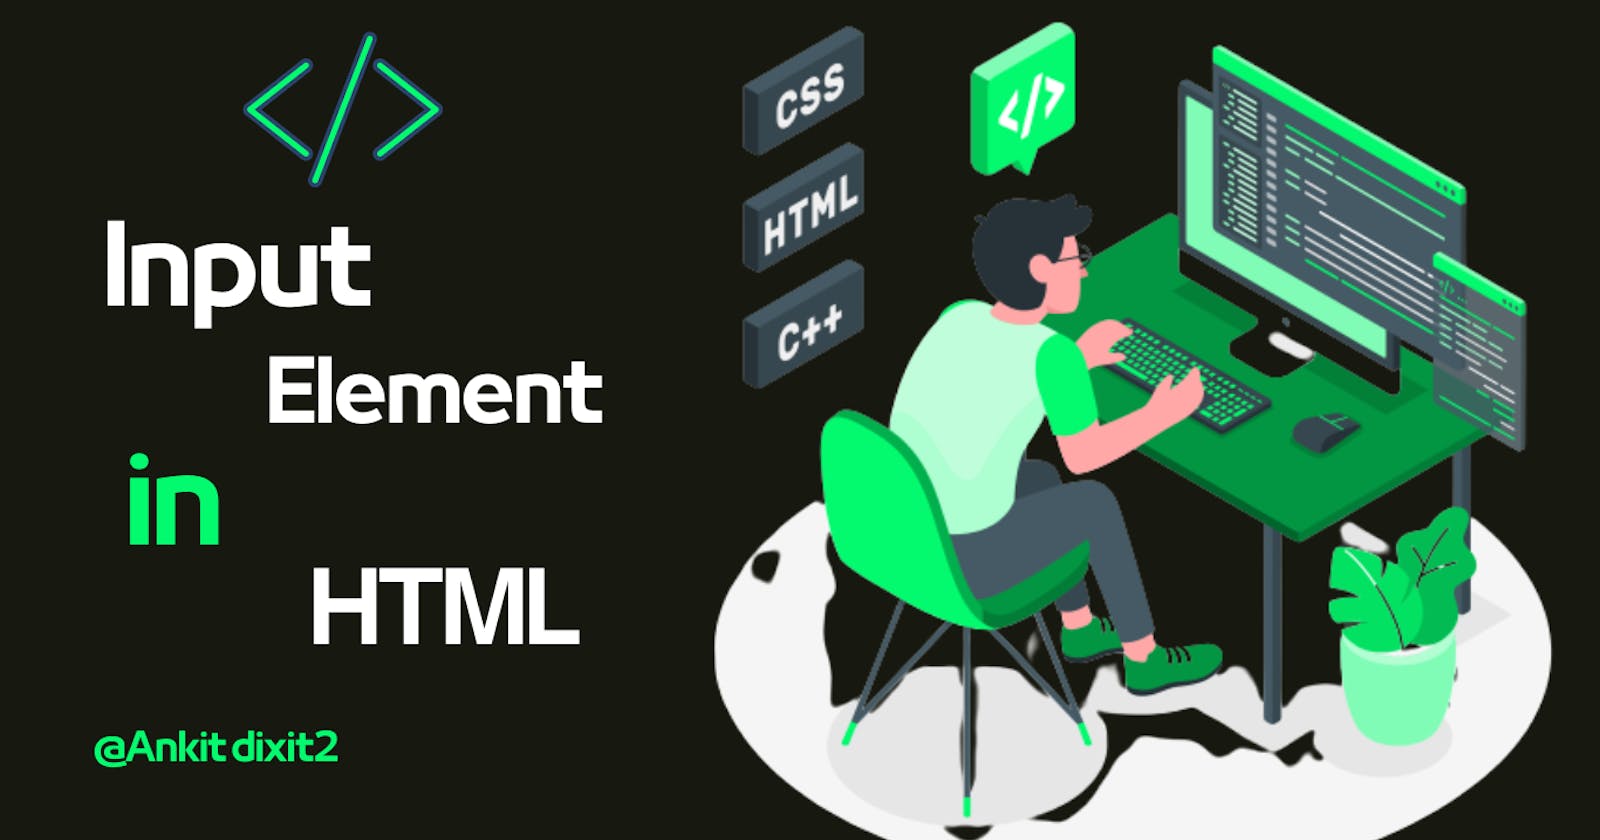 Input Element in HTML